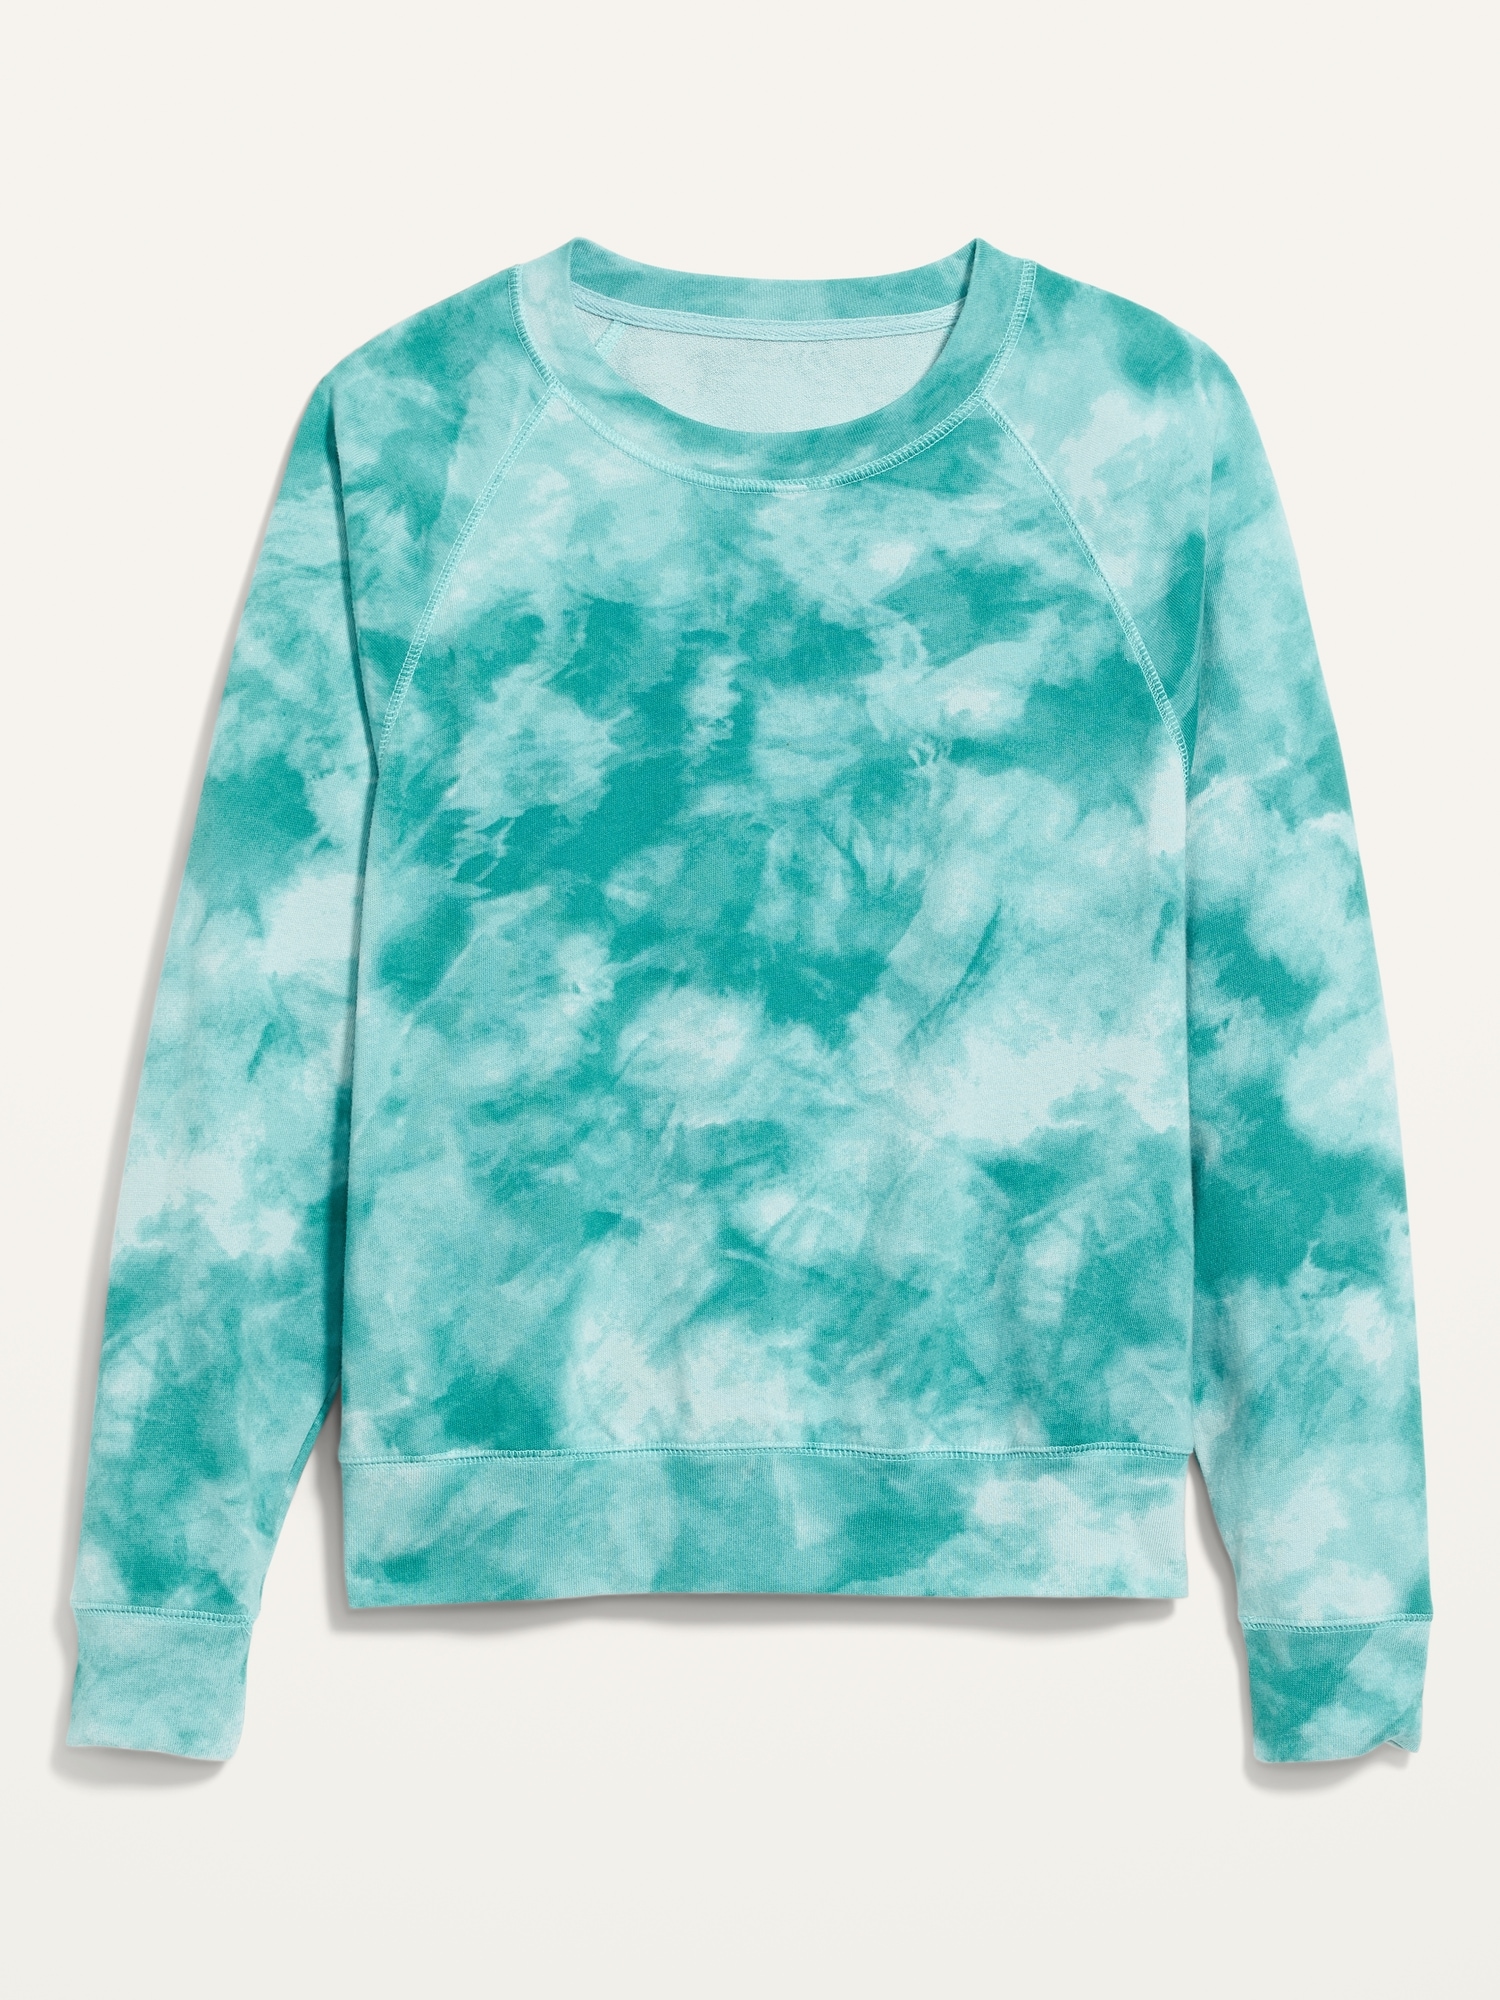 Vintage Specially Dyed Crew-Neck Sweatshirt | Old Navy